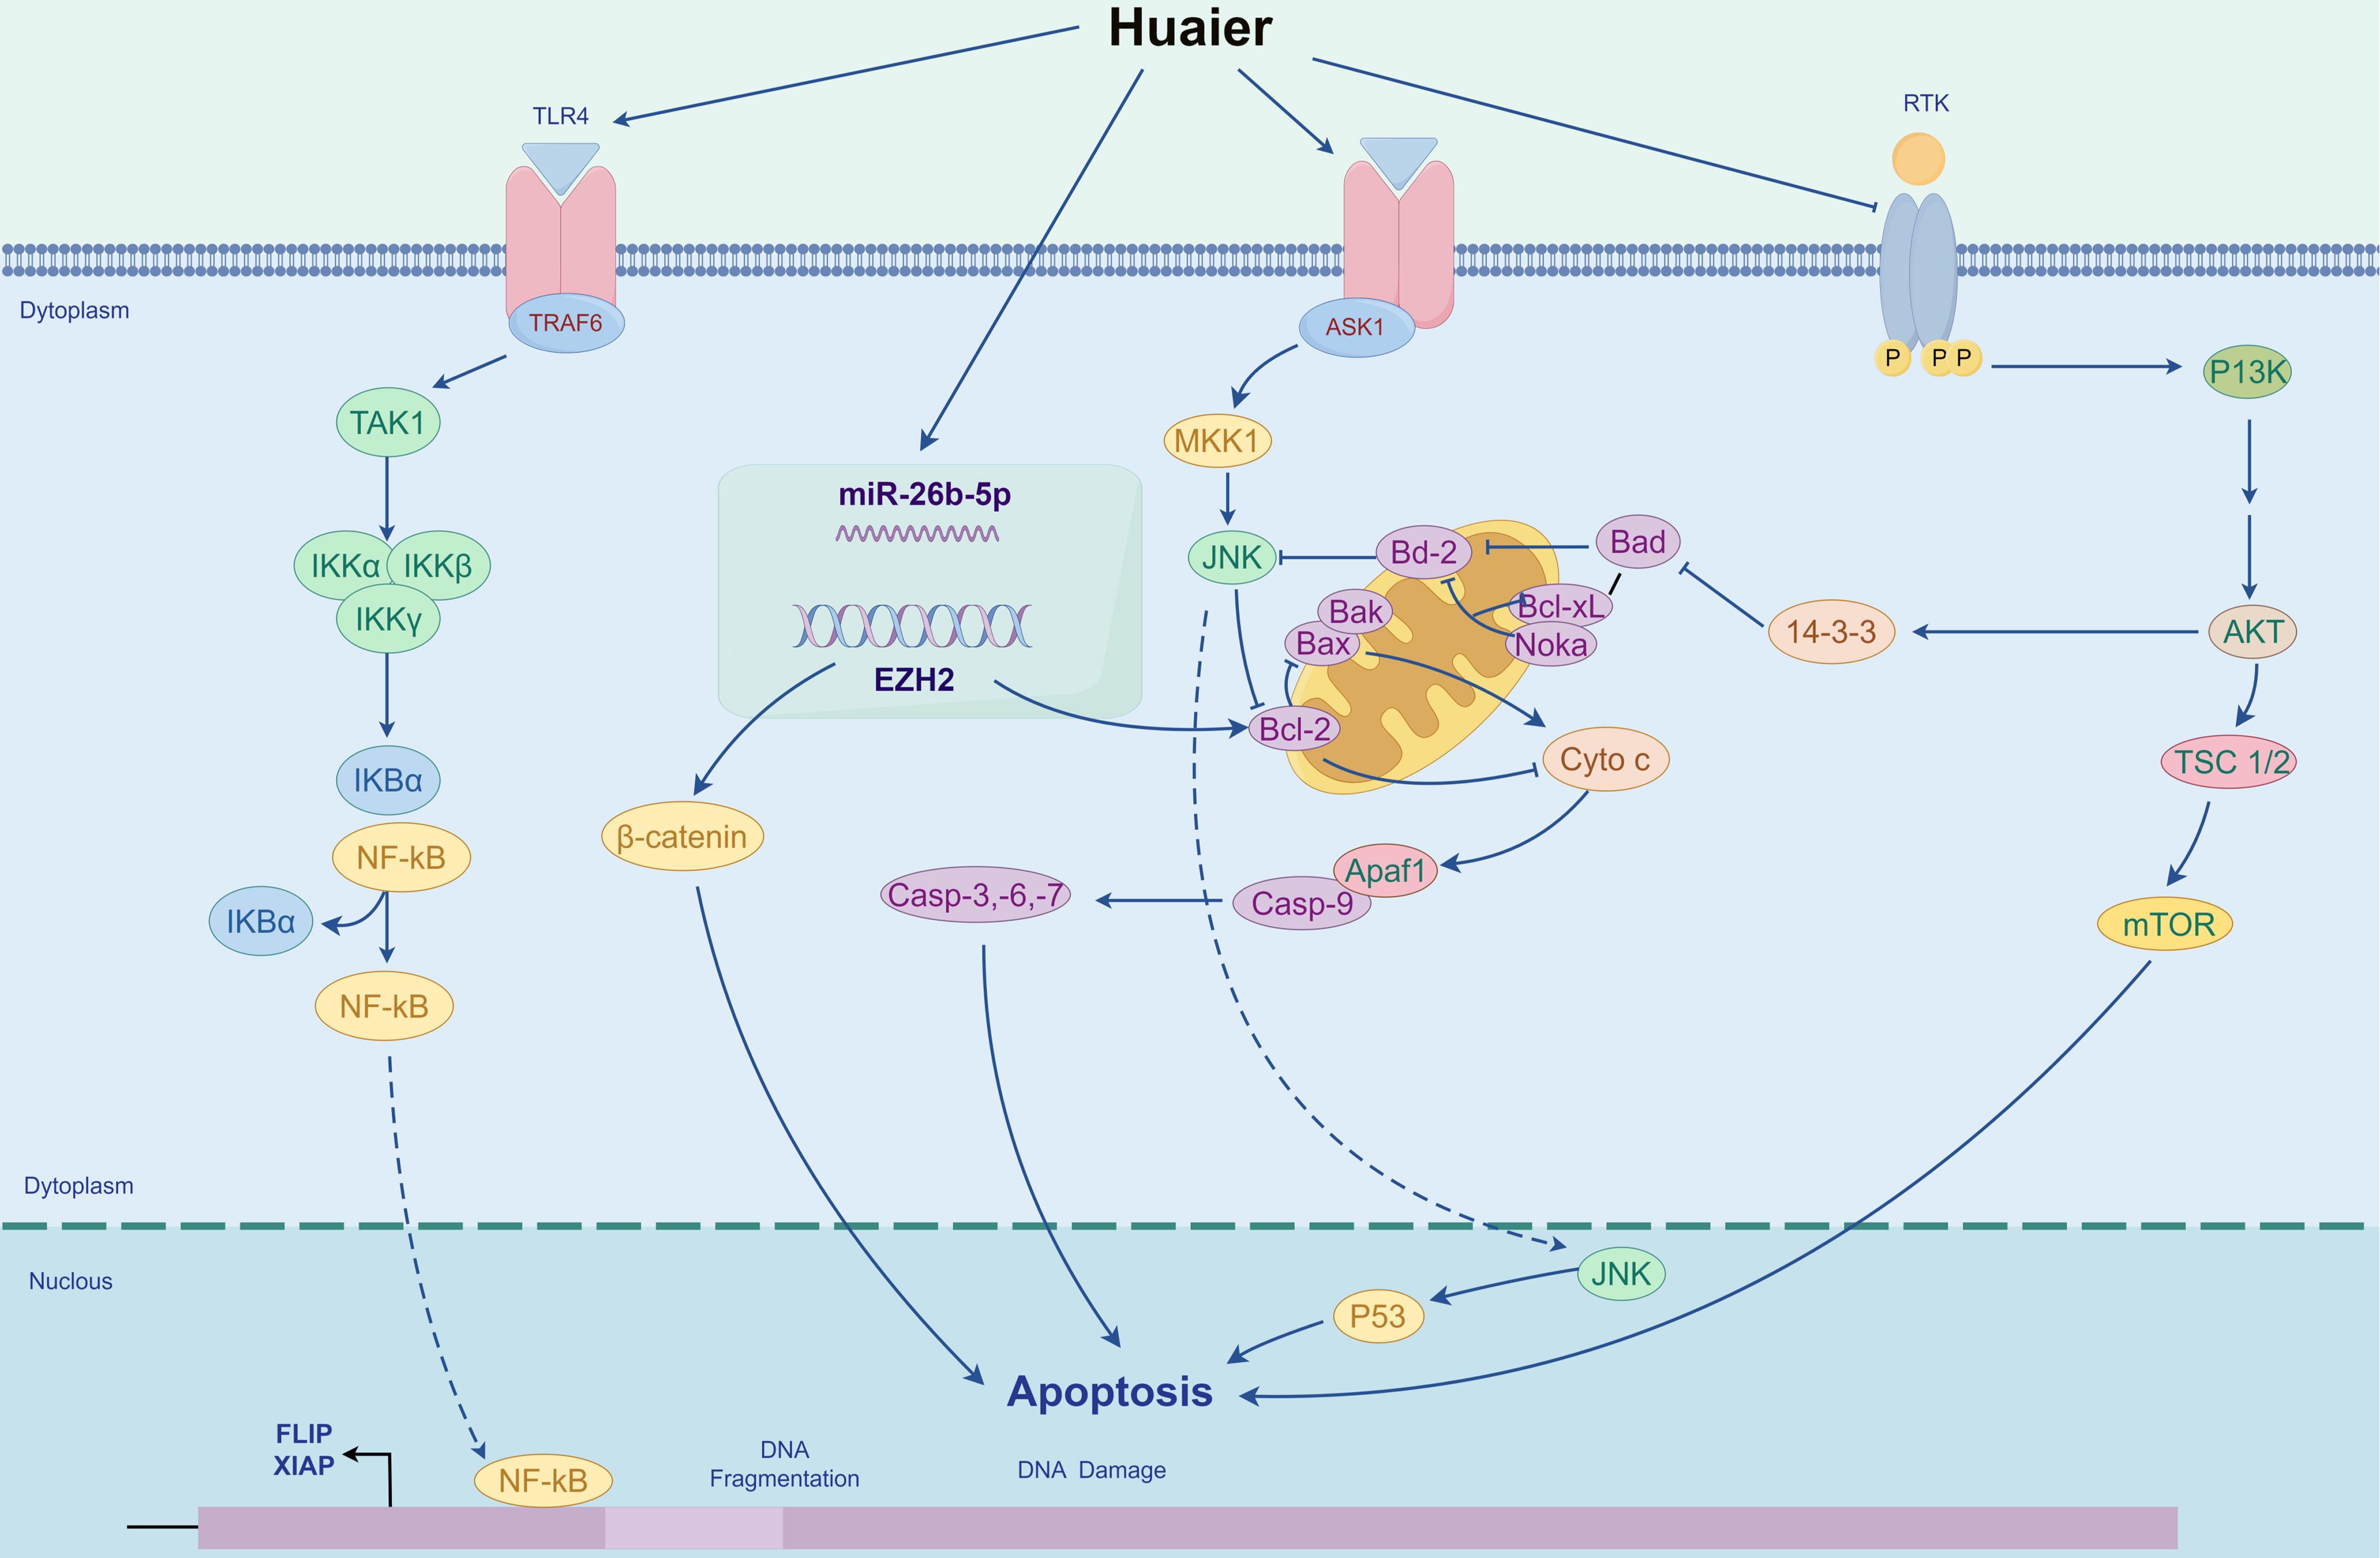 Mechanism of Huaier inducing apoptosis of cancer cells.